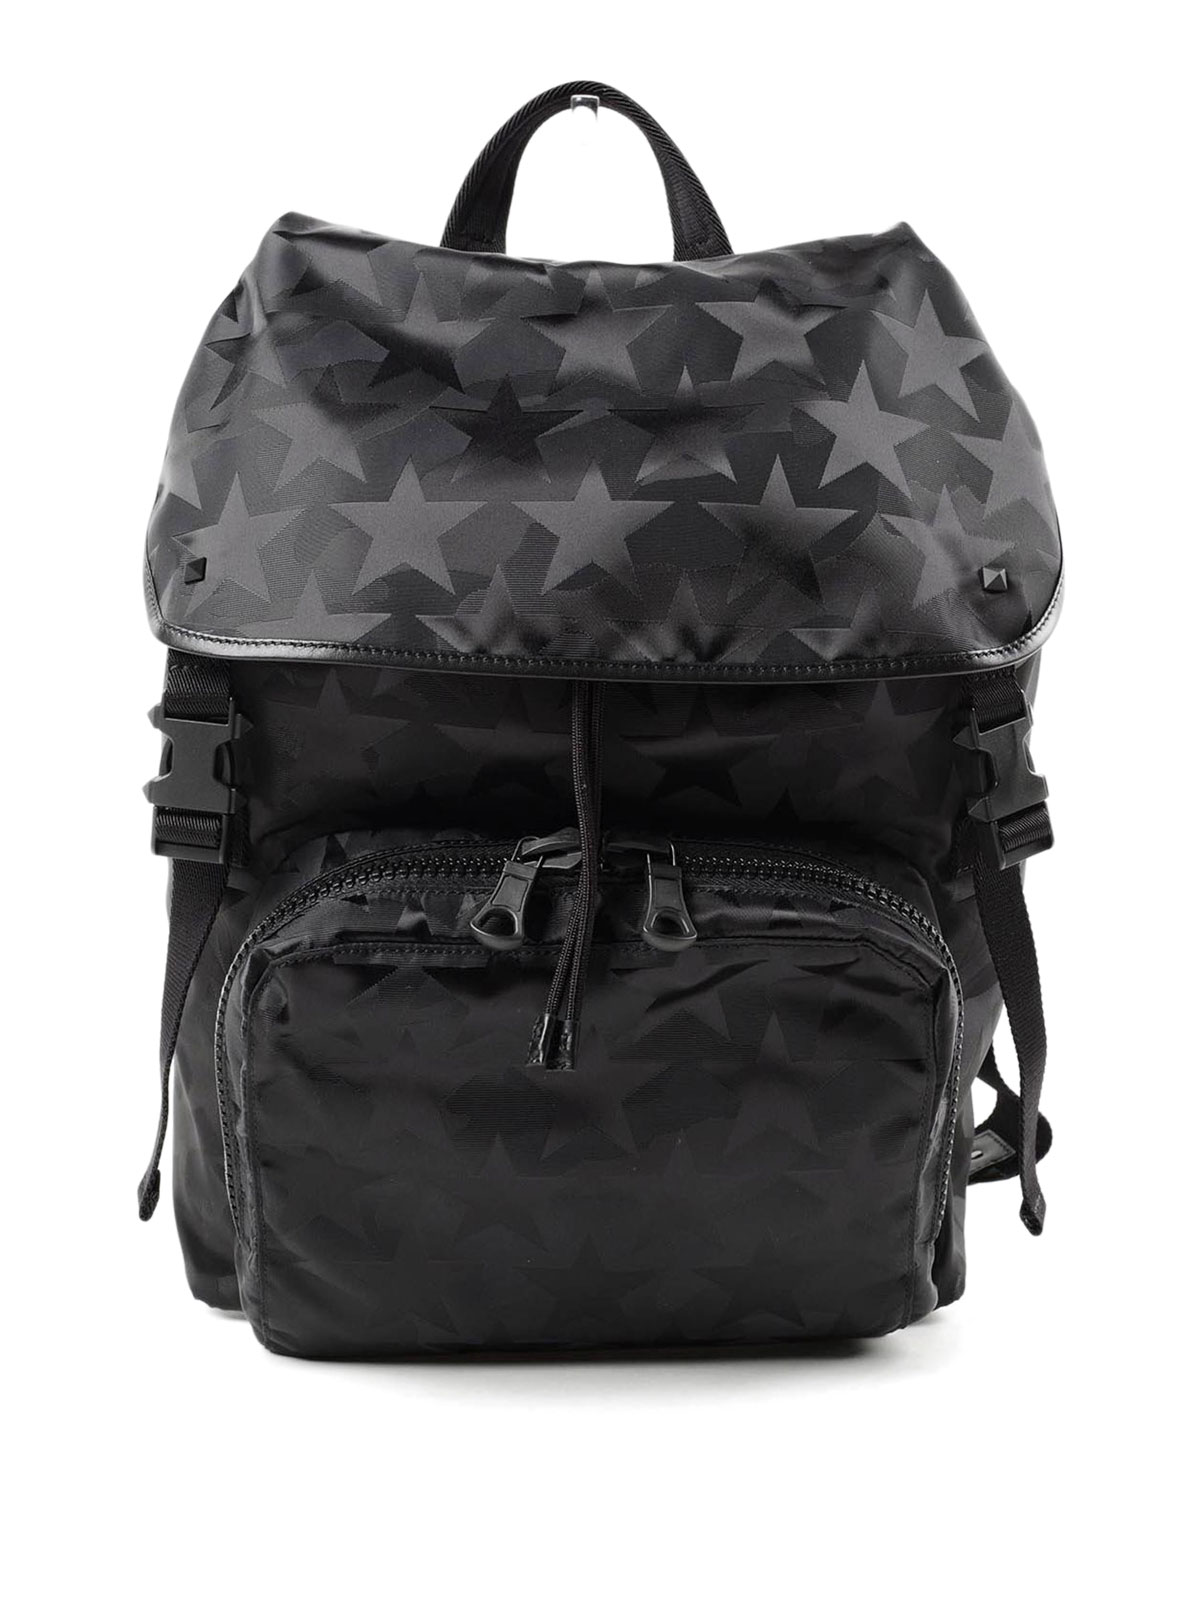 valentino backpack leather